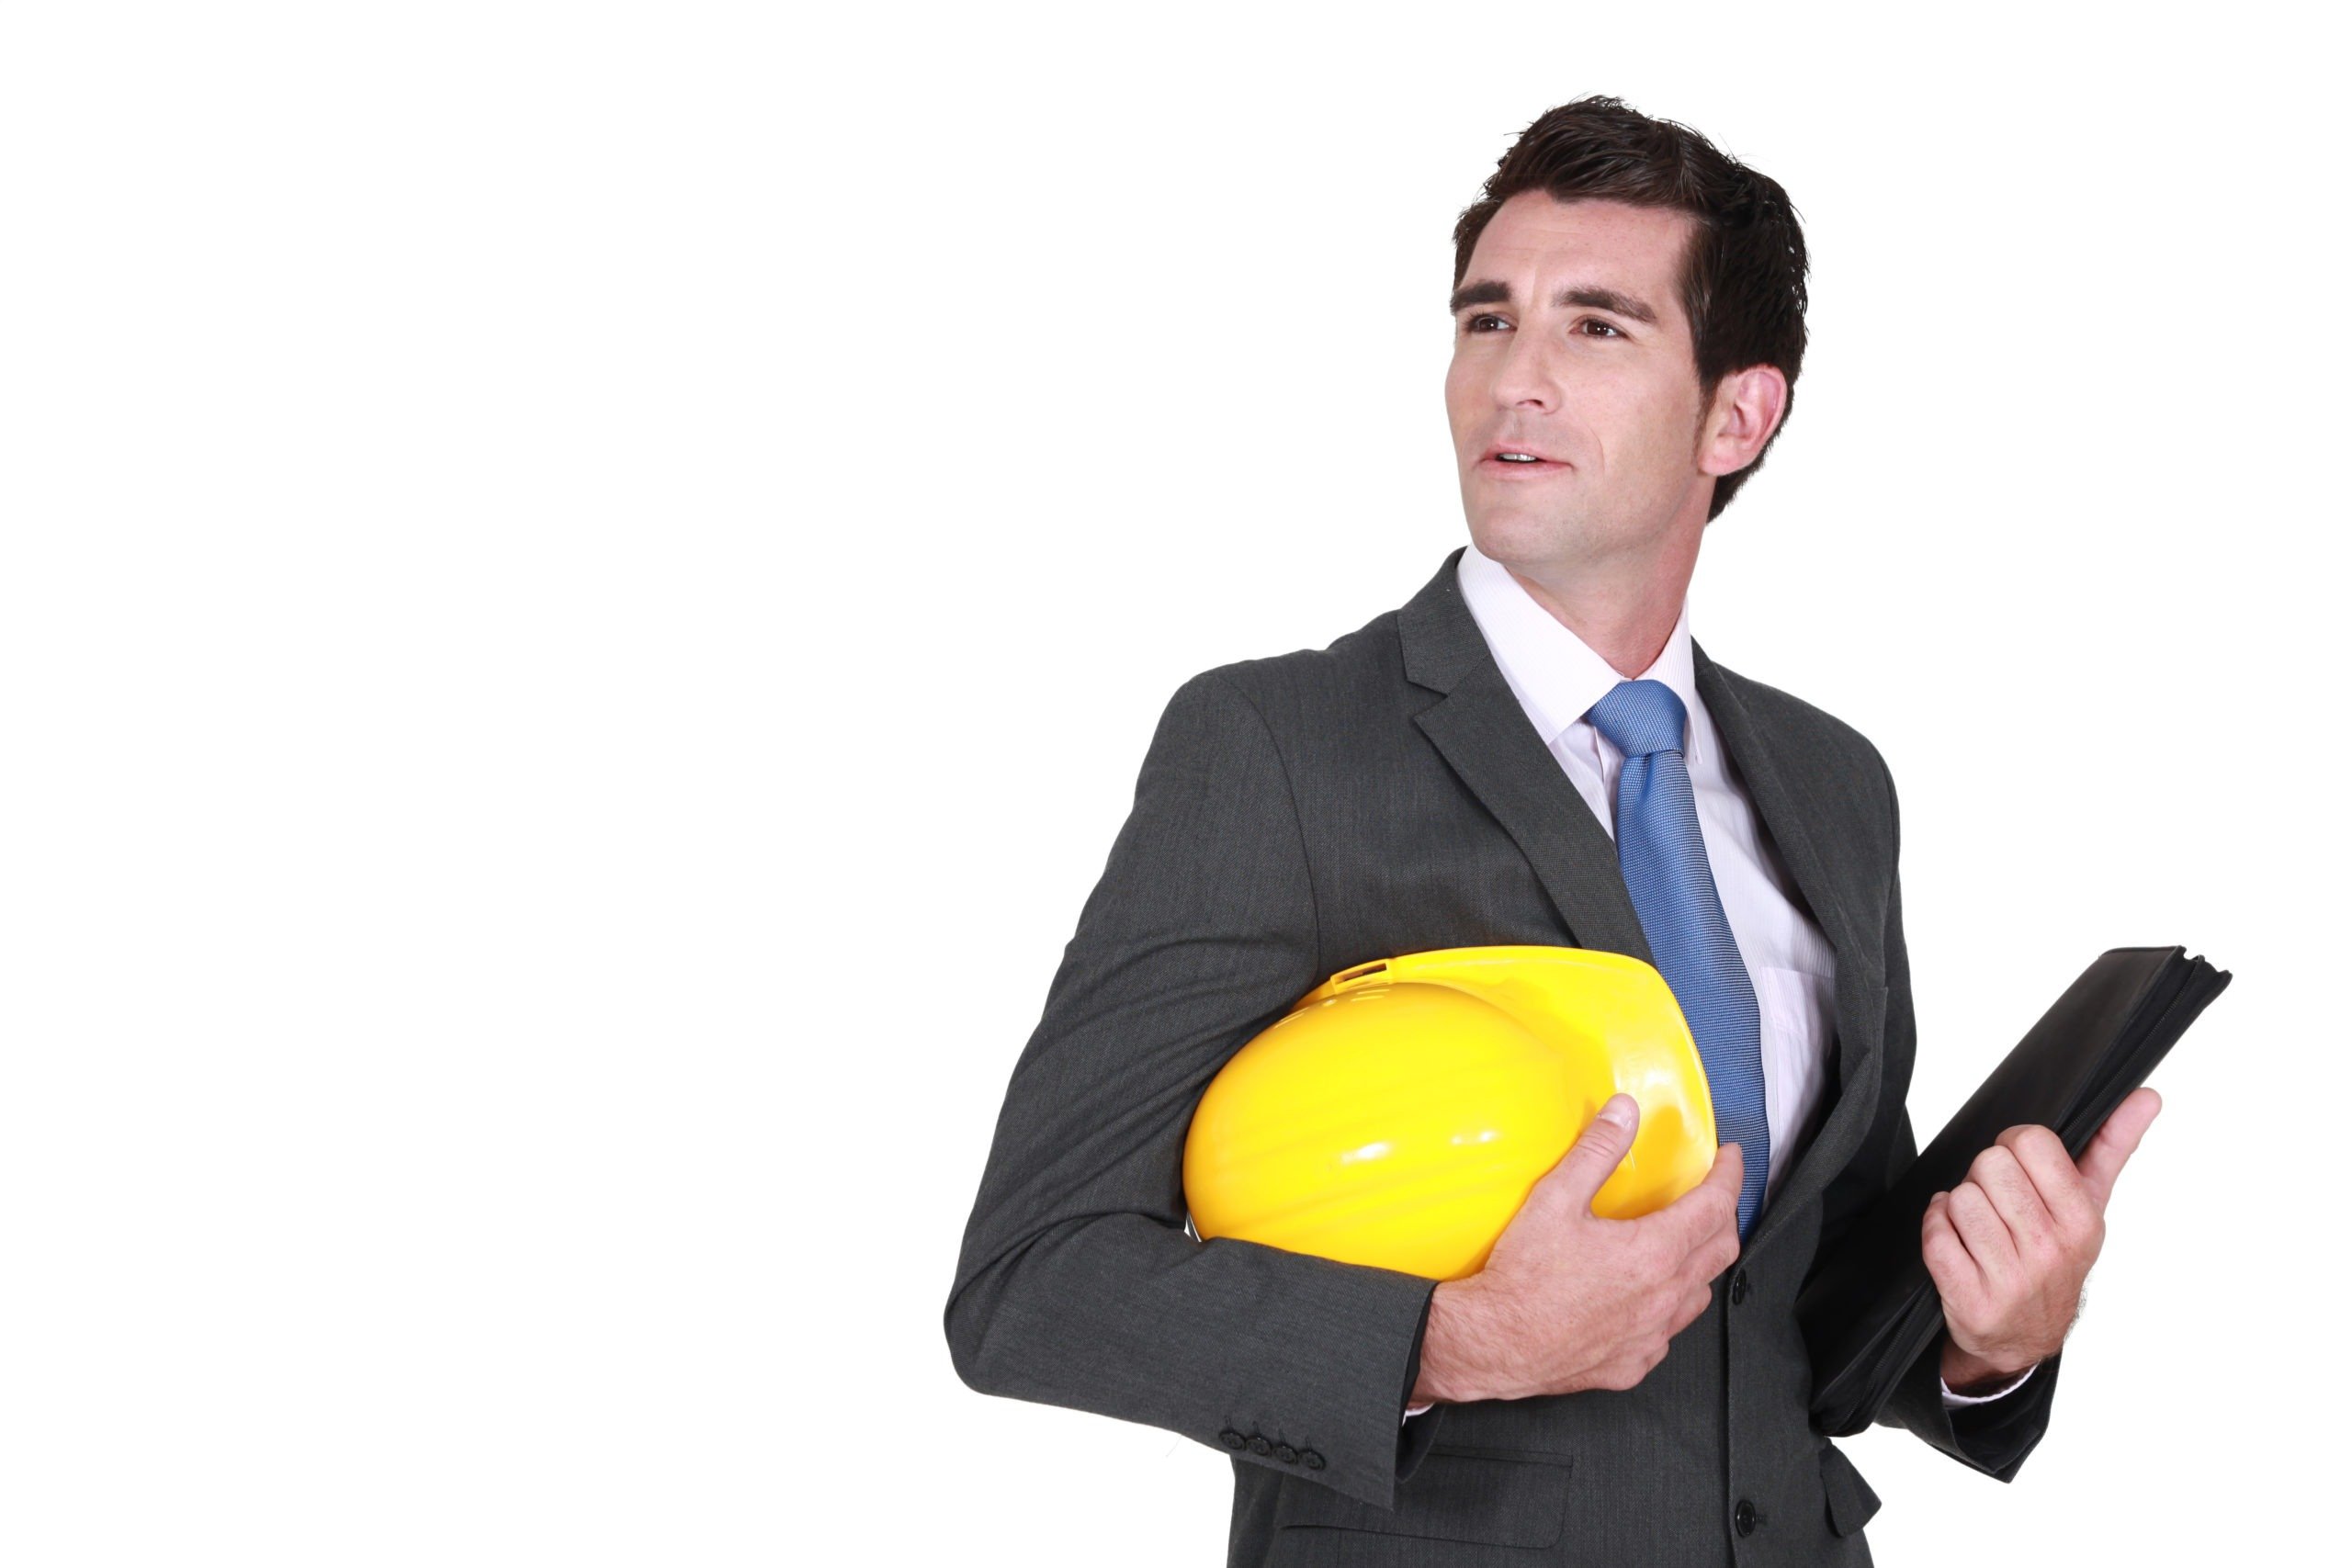 having an expert witness in construction cases can help